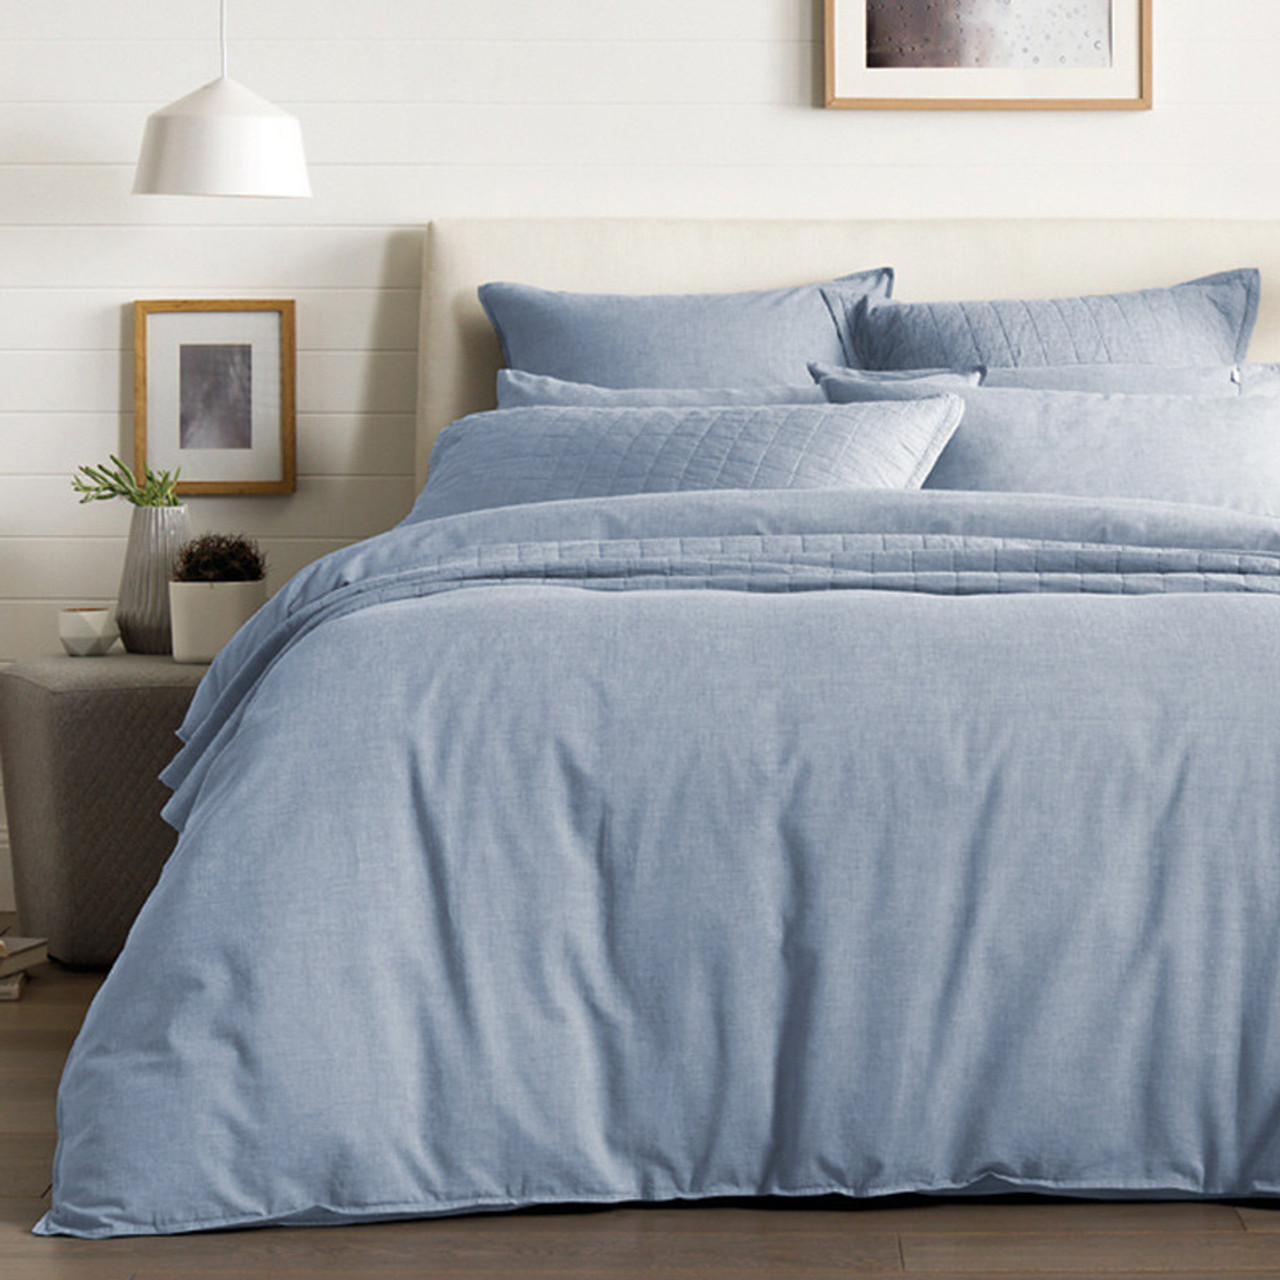 Sheridan Reilly Chambray Quilt Cover Set Queen Bed My Linen